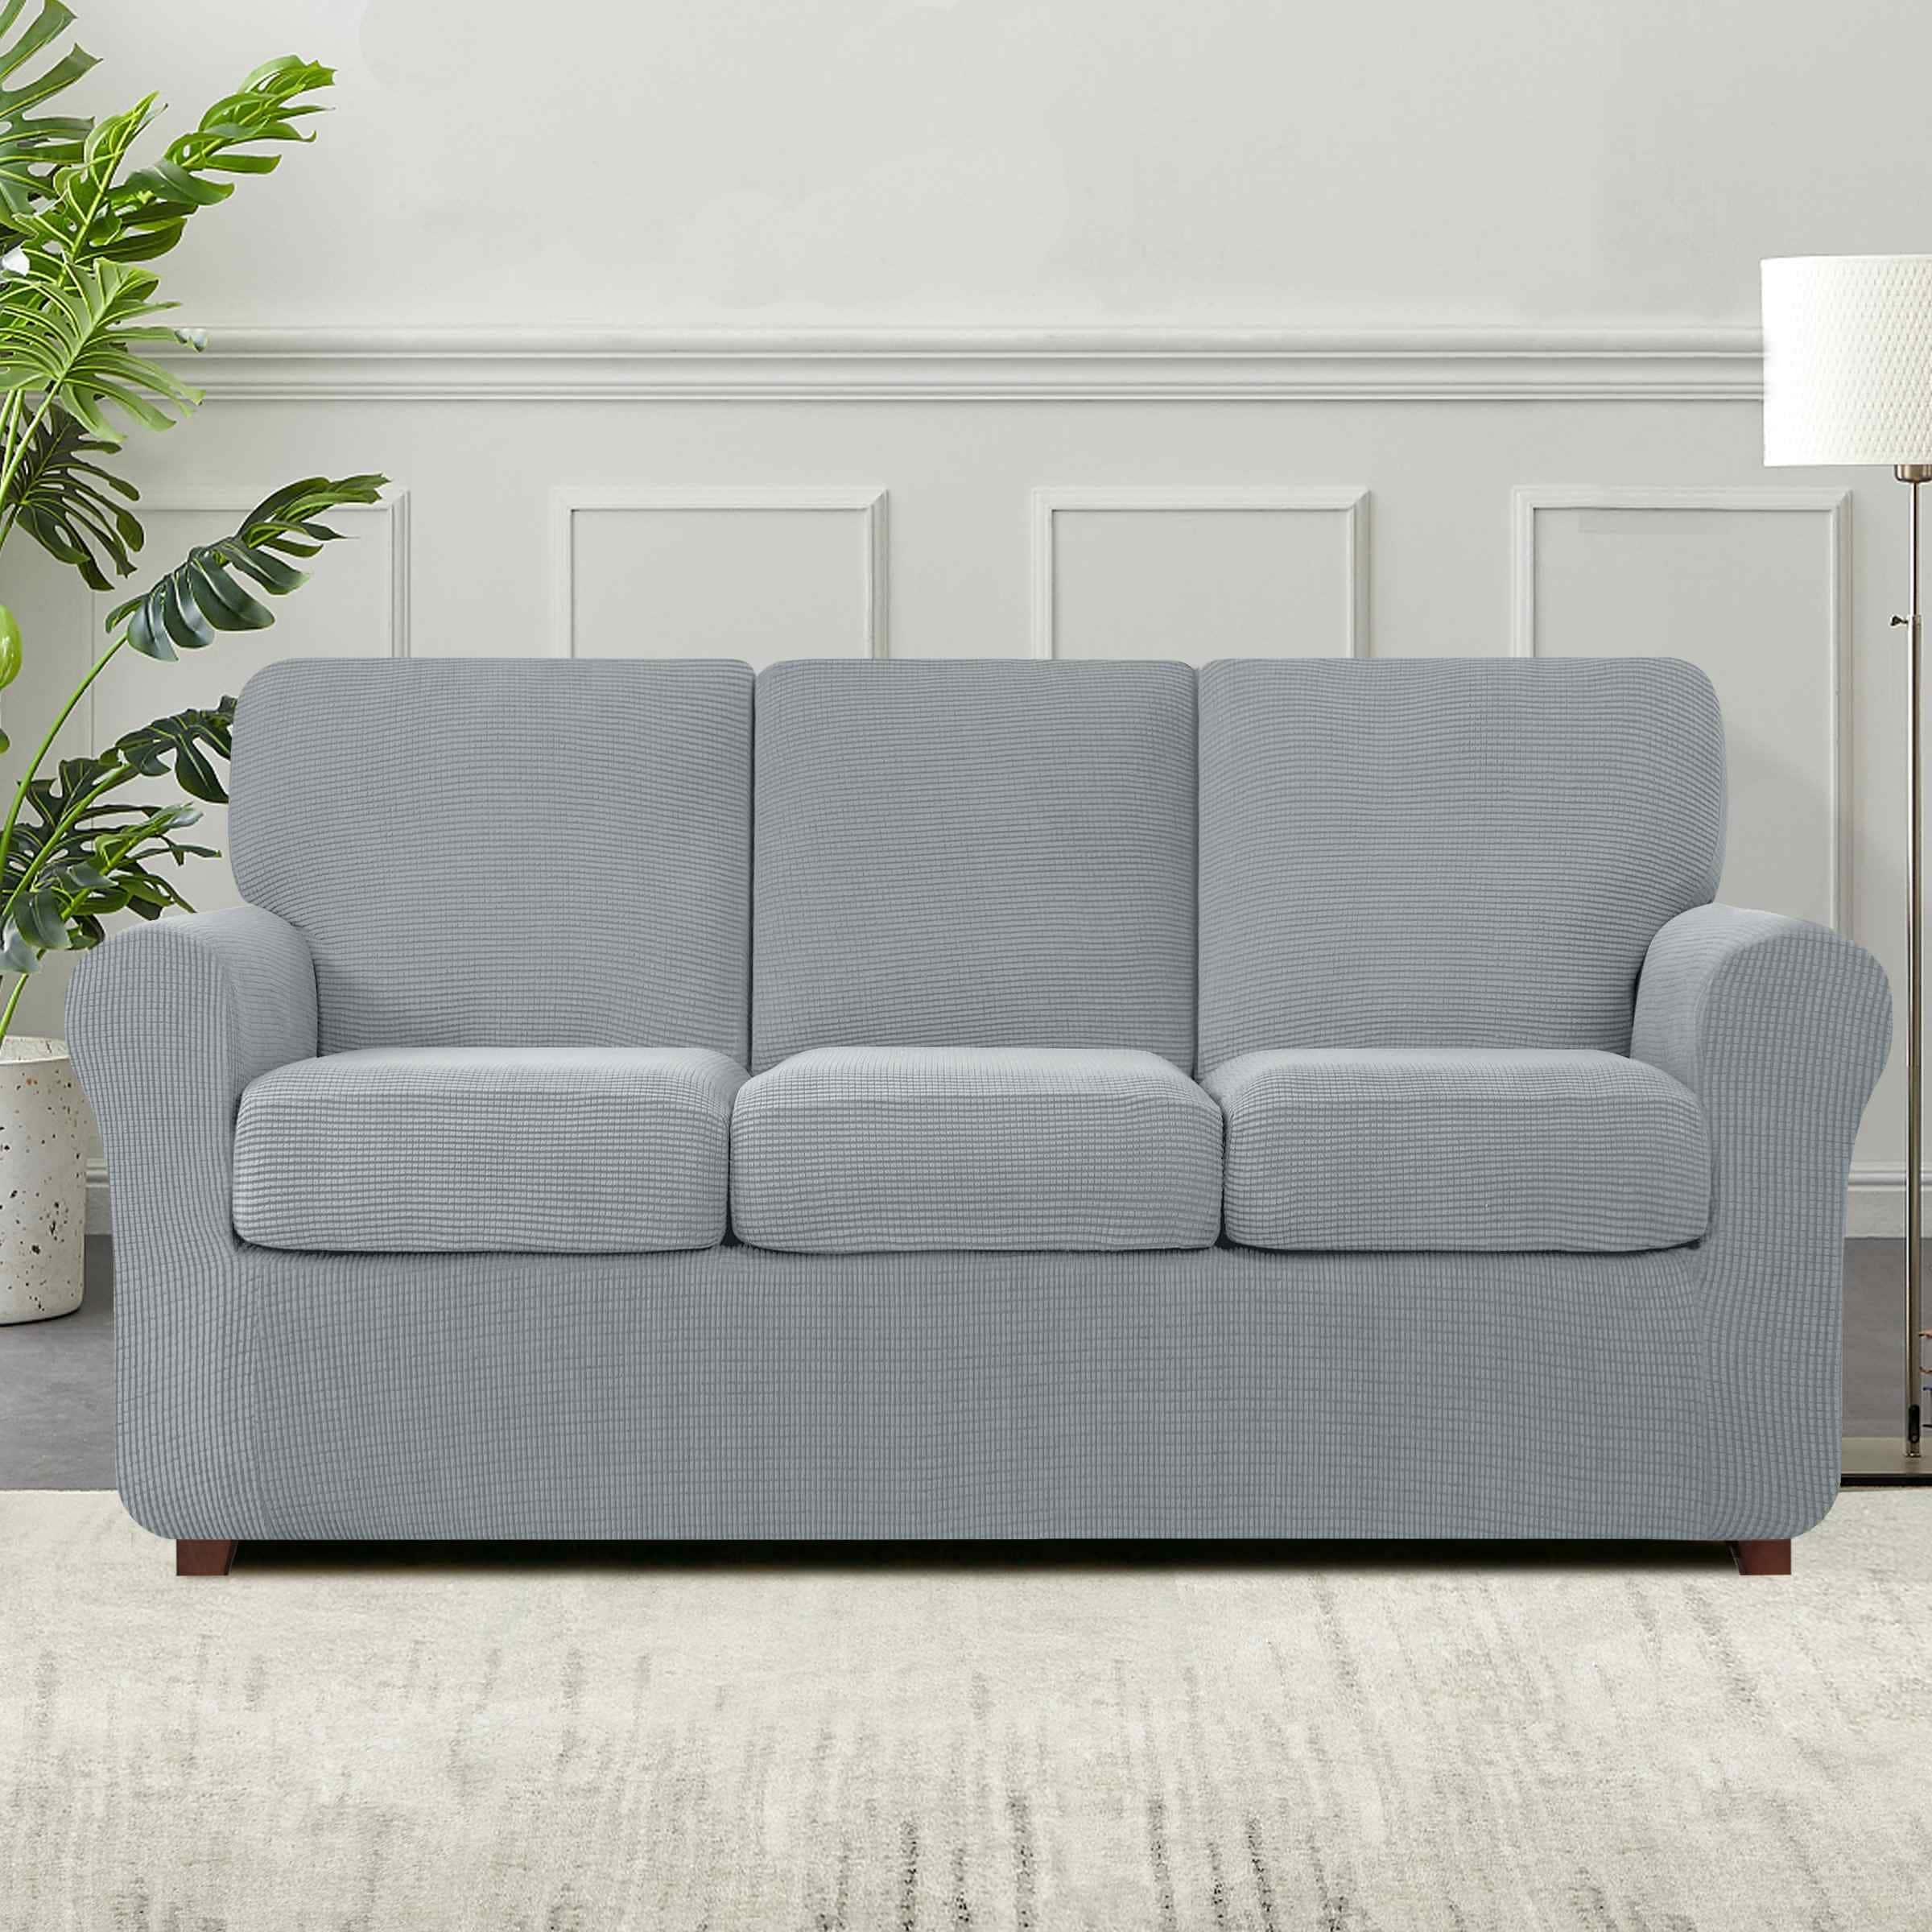 https://ak1.ostkcdn.com/images/products/is/images/direct/0b1c15123fc679c466551e8edc4e15bfd8d7562d/Subrtex-9-Piece-Stretch-Sofa-Slipcover-Sets-with-4-Backrest-Cushion-Covers-and-4-Seat-Cushion-Covers.jpg